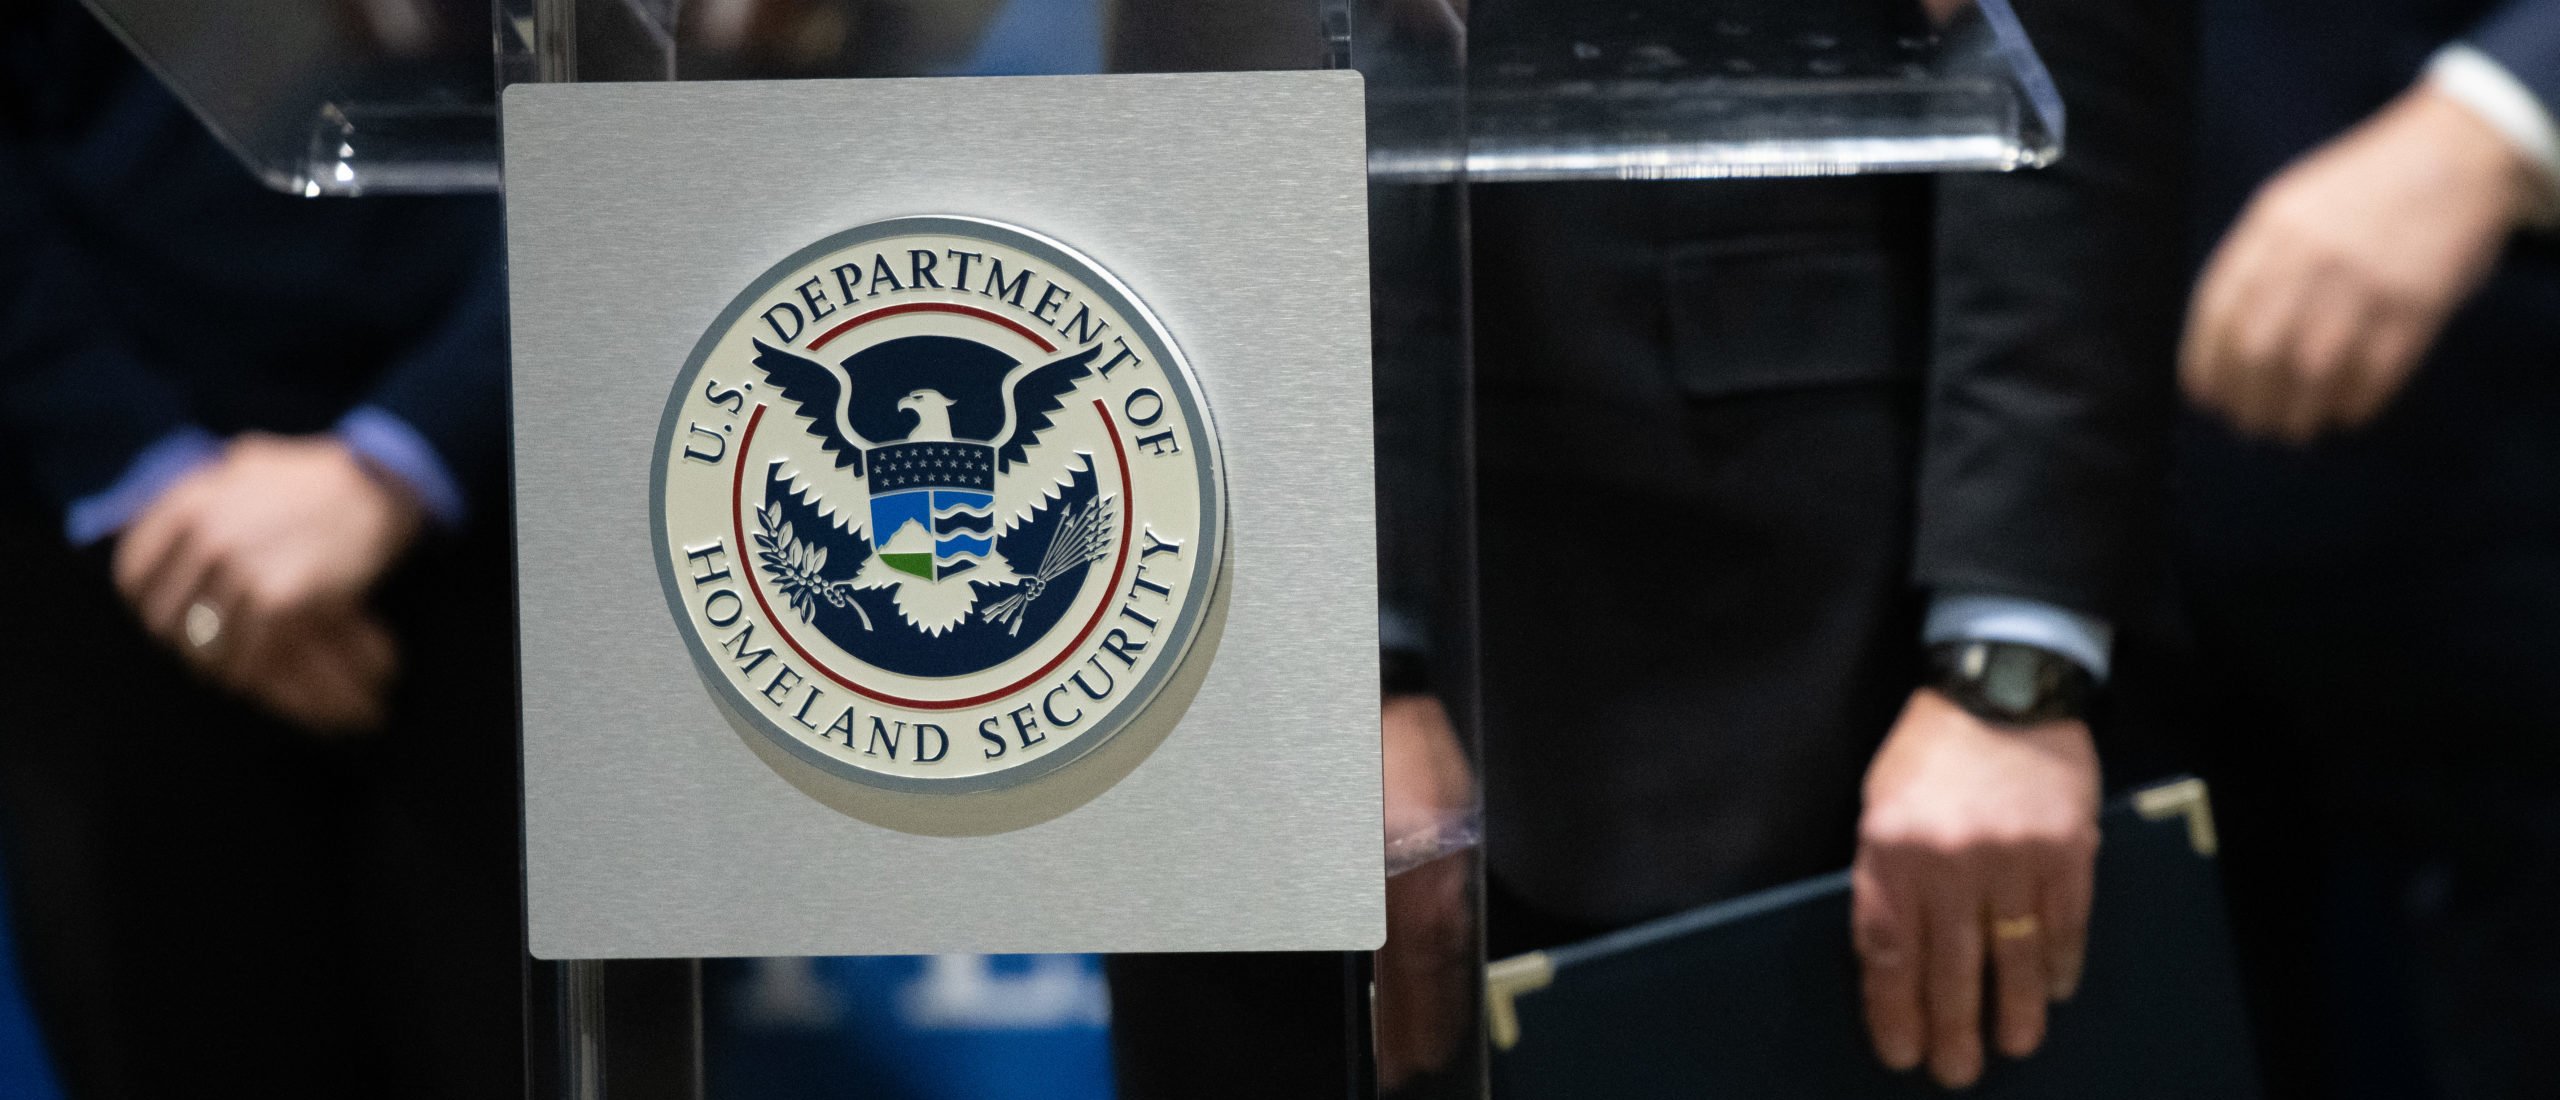 PHILADELPHIA, PA - MARCH 02: The U.S. Department of Homeland Security seal is seen as DHS Secretary Alejandro Mayorkas delivers remarks while visiting a FEMA community vaccination center on March 2, 2021 in Philadelphia, Pennsylvania. (Photo by Mark Makela/Getty Images)